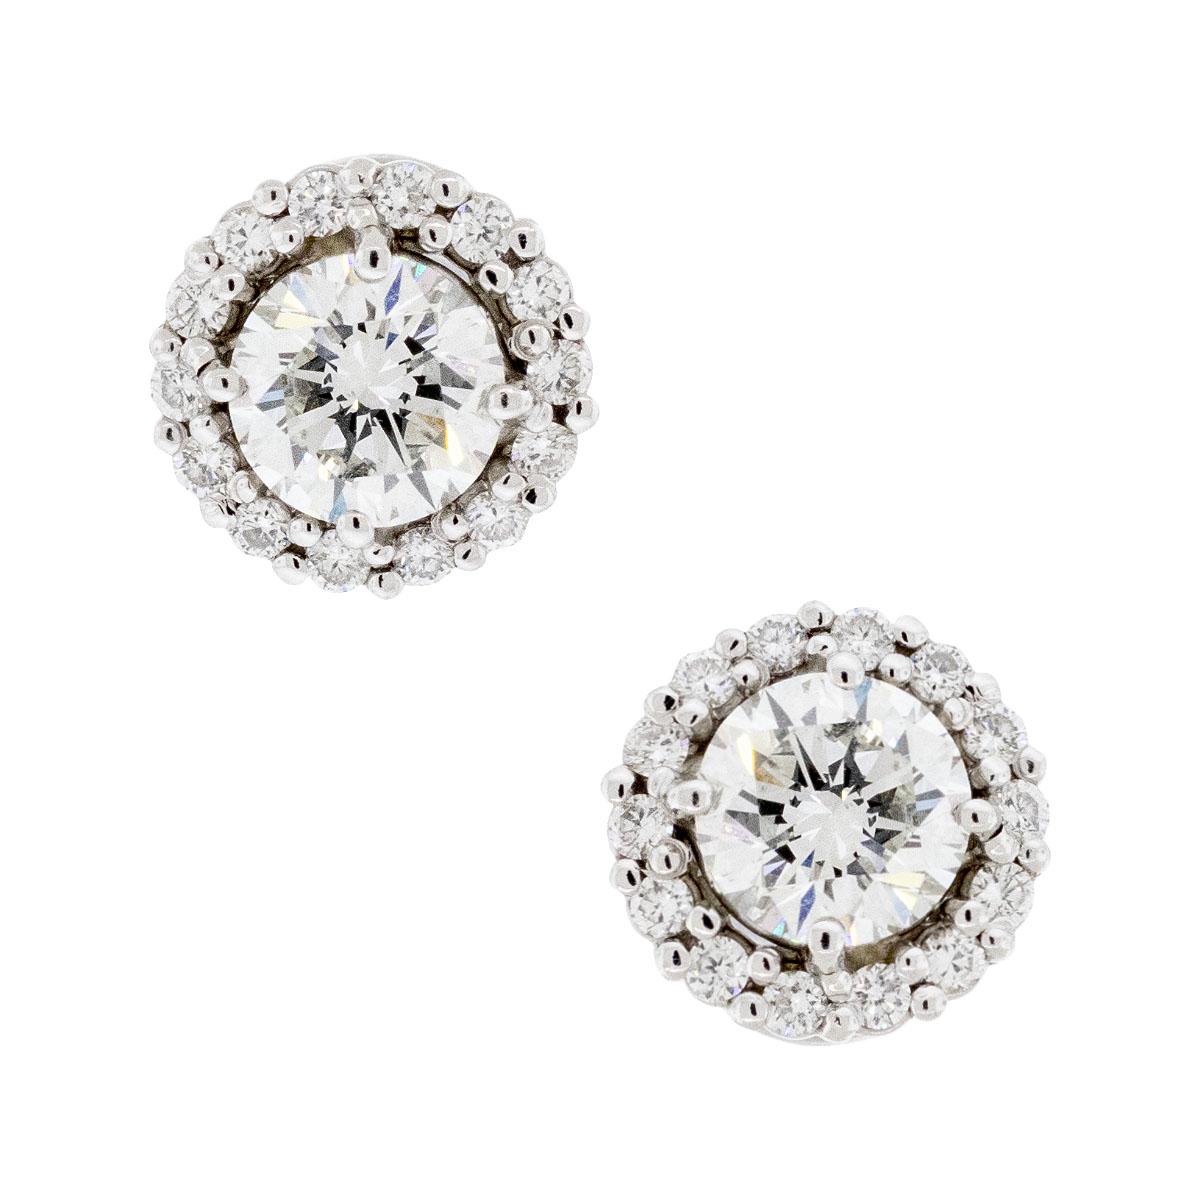 Company: N/A

Style of jewelry: Round cut diamond stud earrings

Material: 14k white gold

Stones: Two natural round cut diamonds that are G in color and SI in clarity.
GIA report # 5136898543, 6204026599

Dimensions: 16mm x 10mm

Weight: 4g